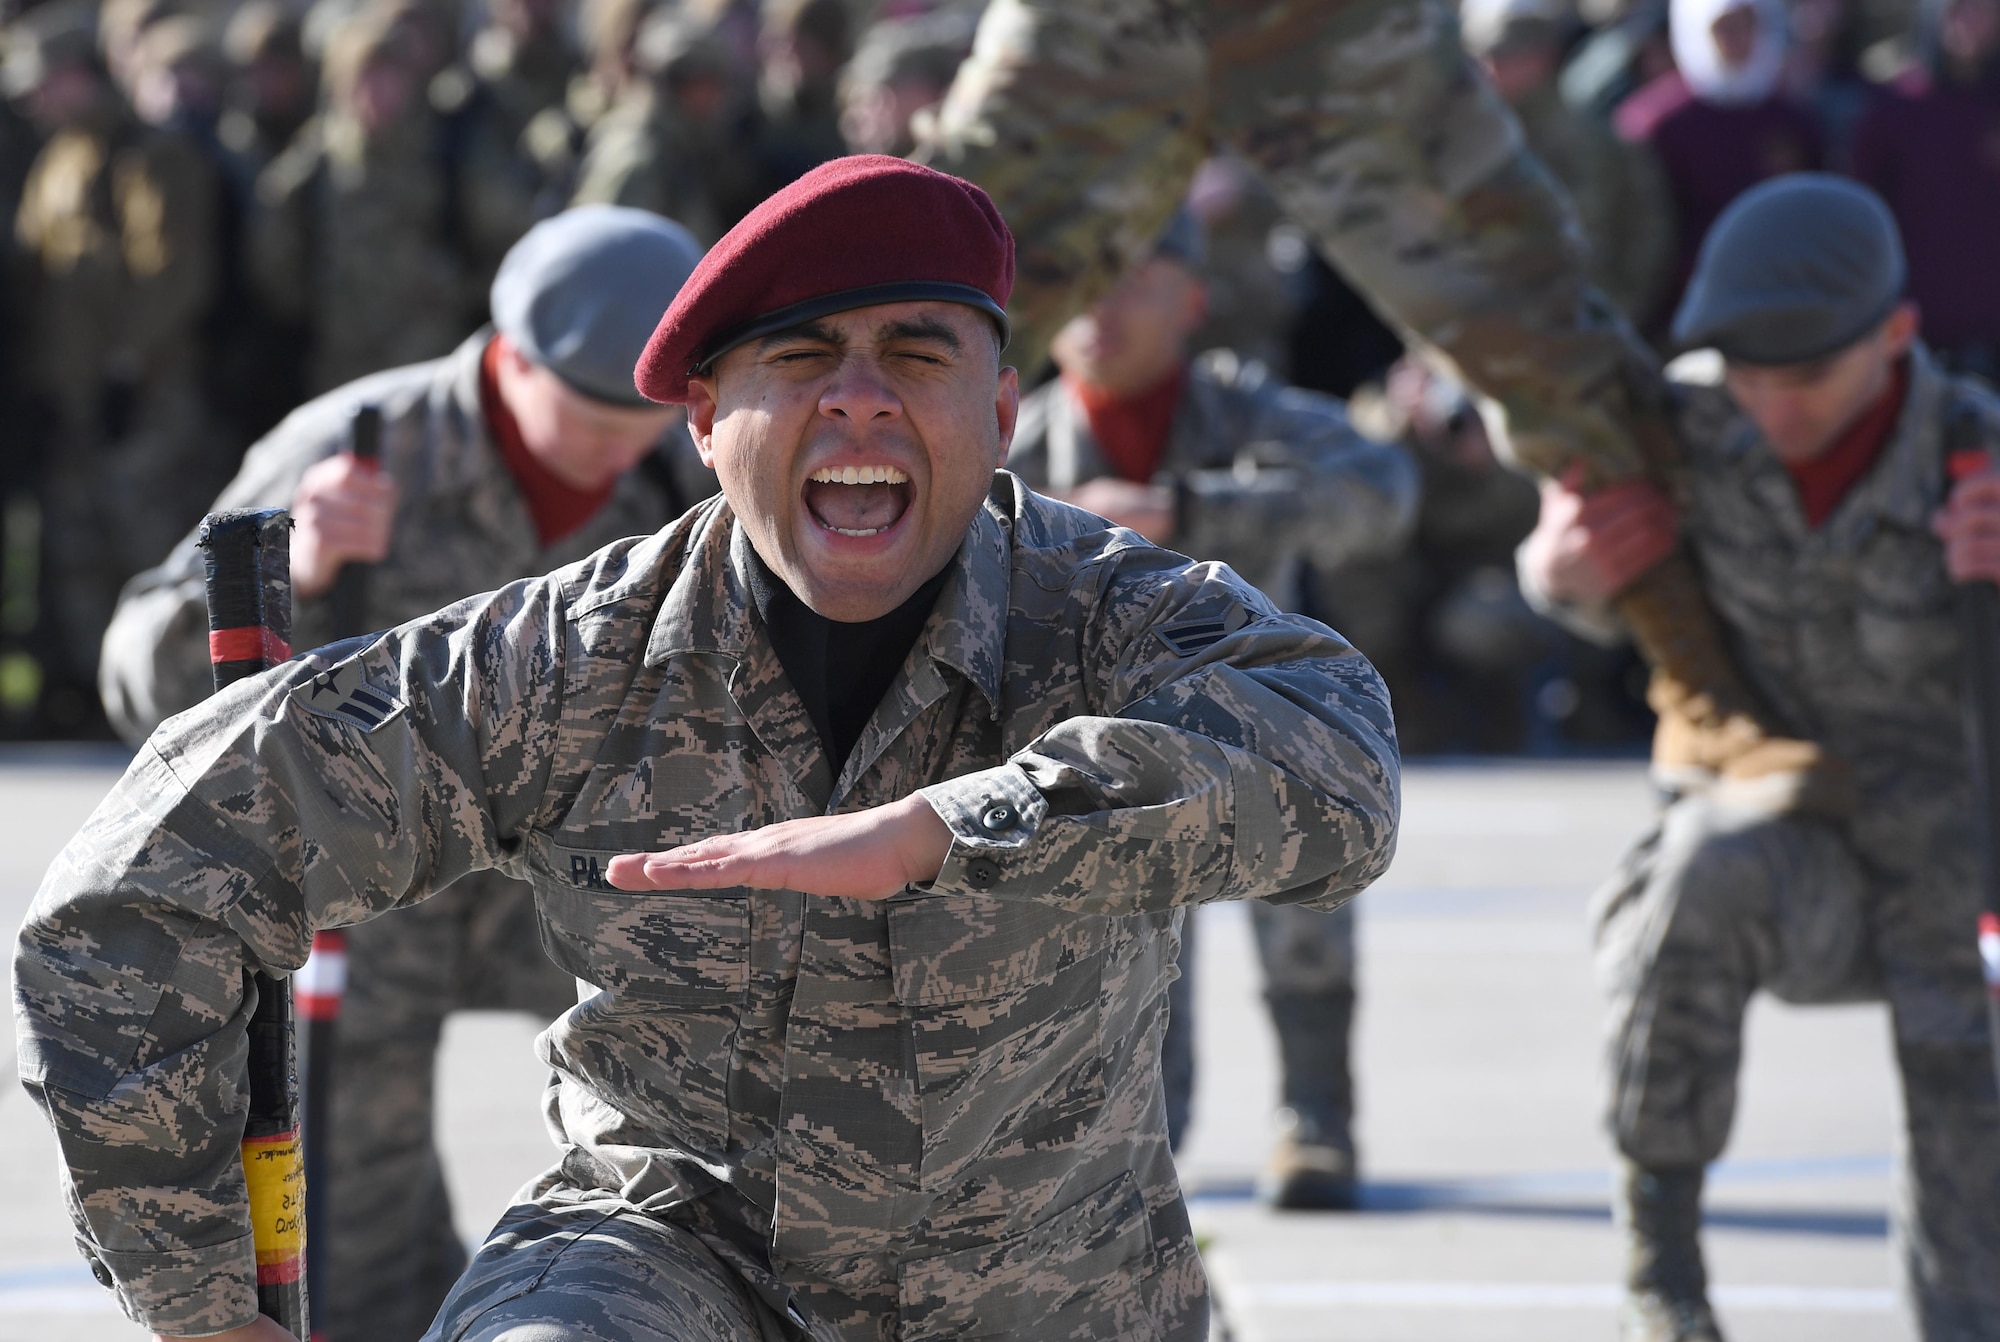 U.S. Air Force Airman 1st Class Carlos Pajaro, 335th Training Squadron freestyle drill team member, performs during the 81st Training Group drill down on the Levitow Training Support Facility drill pad at Keesler Air Force Base, Mississippi, Feb. 21, 2020. Airmen from the 81st TRG competed in a quarterly open ranks inspection, regulation drill routine and freestyle drill routine. Keesler trains more than 30,000 students each year. While in training, Airmen are given the opportunity to volunteer to learn and execute drill down routines. (U.S. Air Force photo by Kemberly Groue)